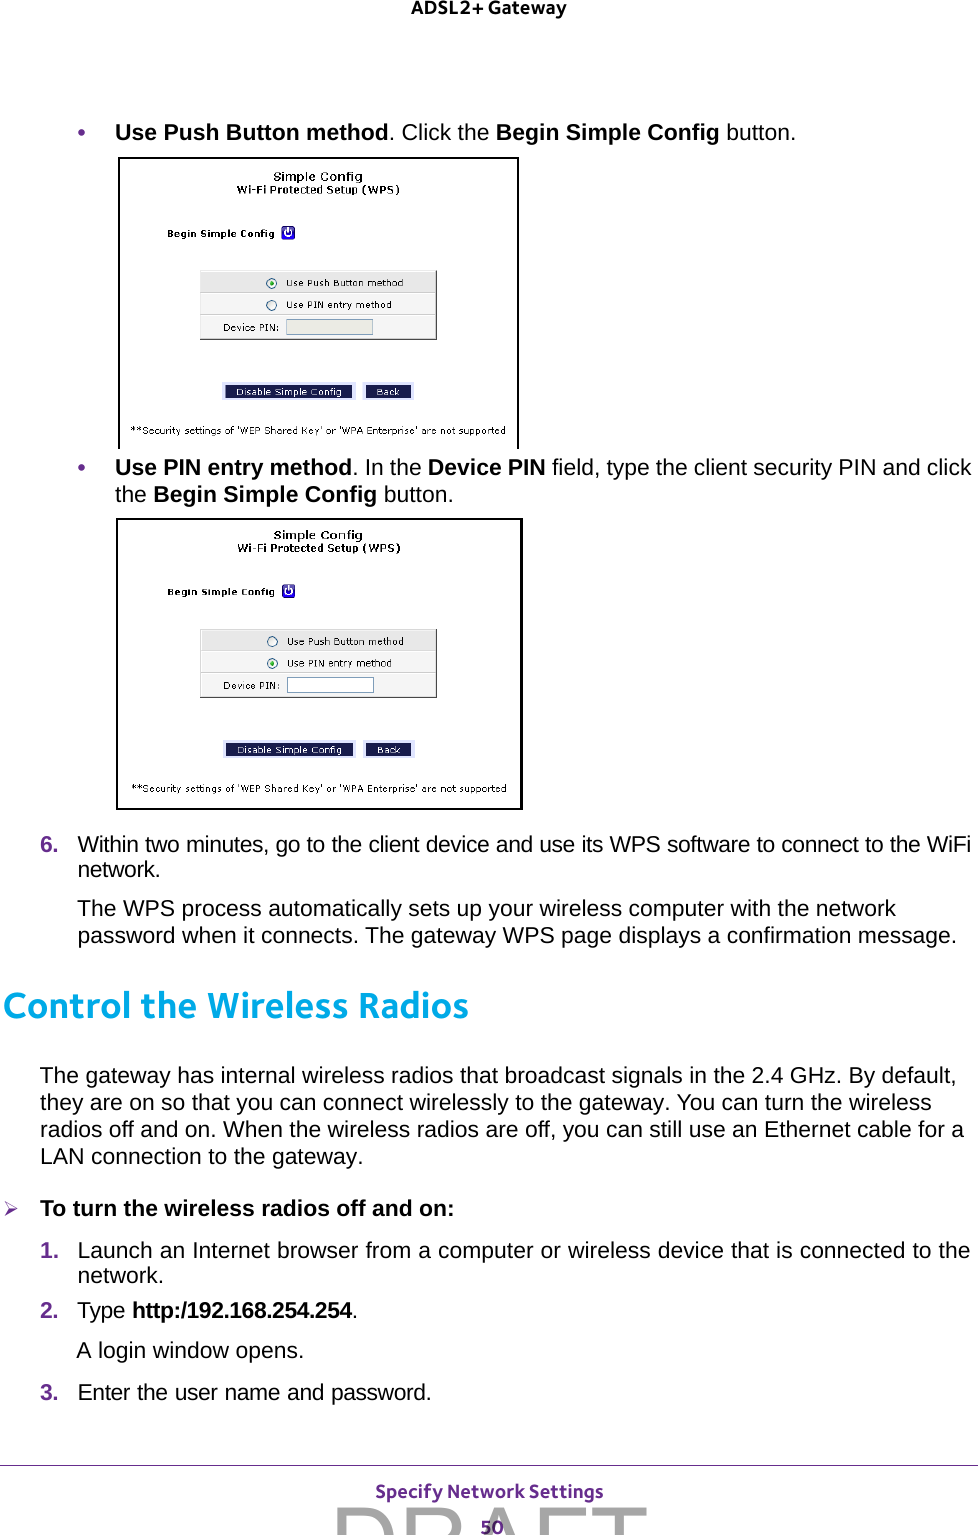 Specify Network Settings 50ADSL2+ Gateway •Use Push Button method. Click the Begin Simple Config button. •Use PIN entry method. In the Device PIN field, type the client security PIN and click the Begin Simple Config button.6.  Within two minutes, go to the client device and use its WPS software to connect to the WiFi network.The WPS process automatically sets up your wireless computer with the network password when it connects. The gateway WPS page displays a confirmation message. Control the Wireless RadiosThe gateway has internal wireless radios that broadcast signals in the 2.4 GHz. By default, they are on so that you can connect wirelessly to the gateway. You can turn the wireless radios off and on. When the wireless radios are off, you can still use an Ethernet cable for a LAN connection to the gateway.To turn the wireless radios off and on:1.  Launch an Internet browser from a computer or wireless device that is connected to the network.2.  Type http:/192.168.254.254.A login window opens.3.  Enter the user name and password.DRAFT